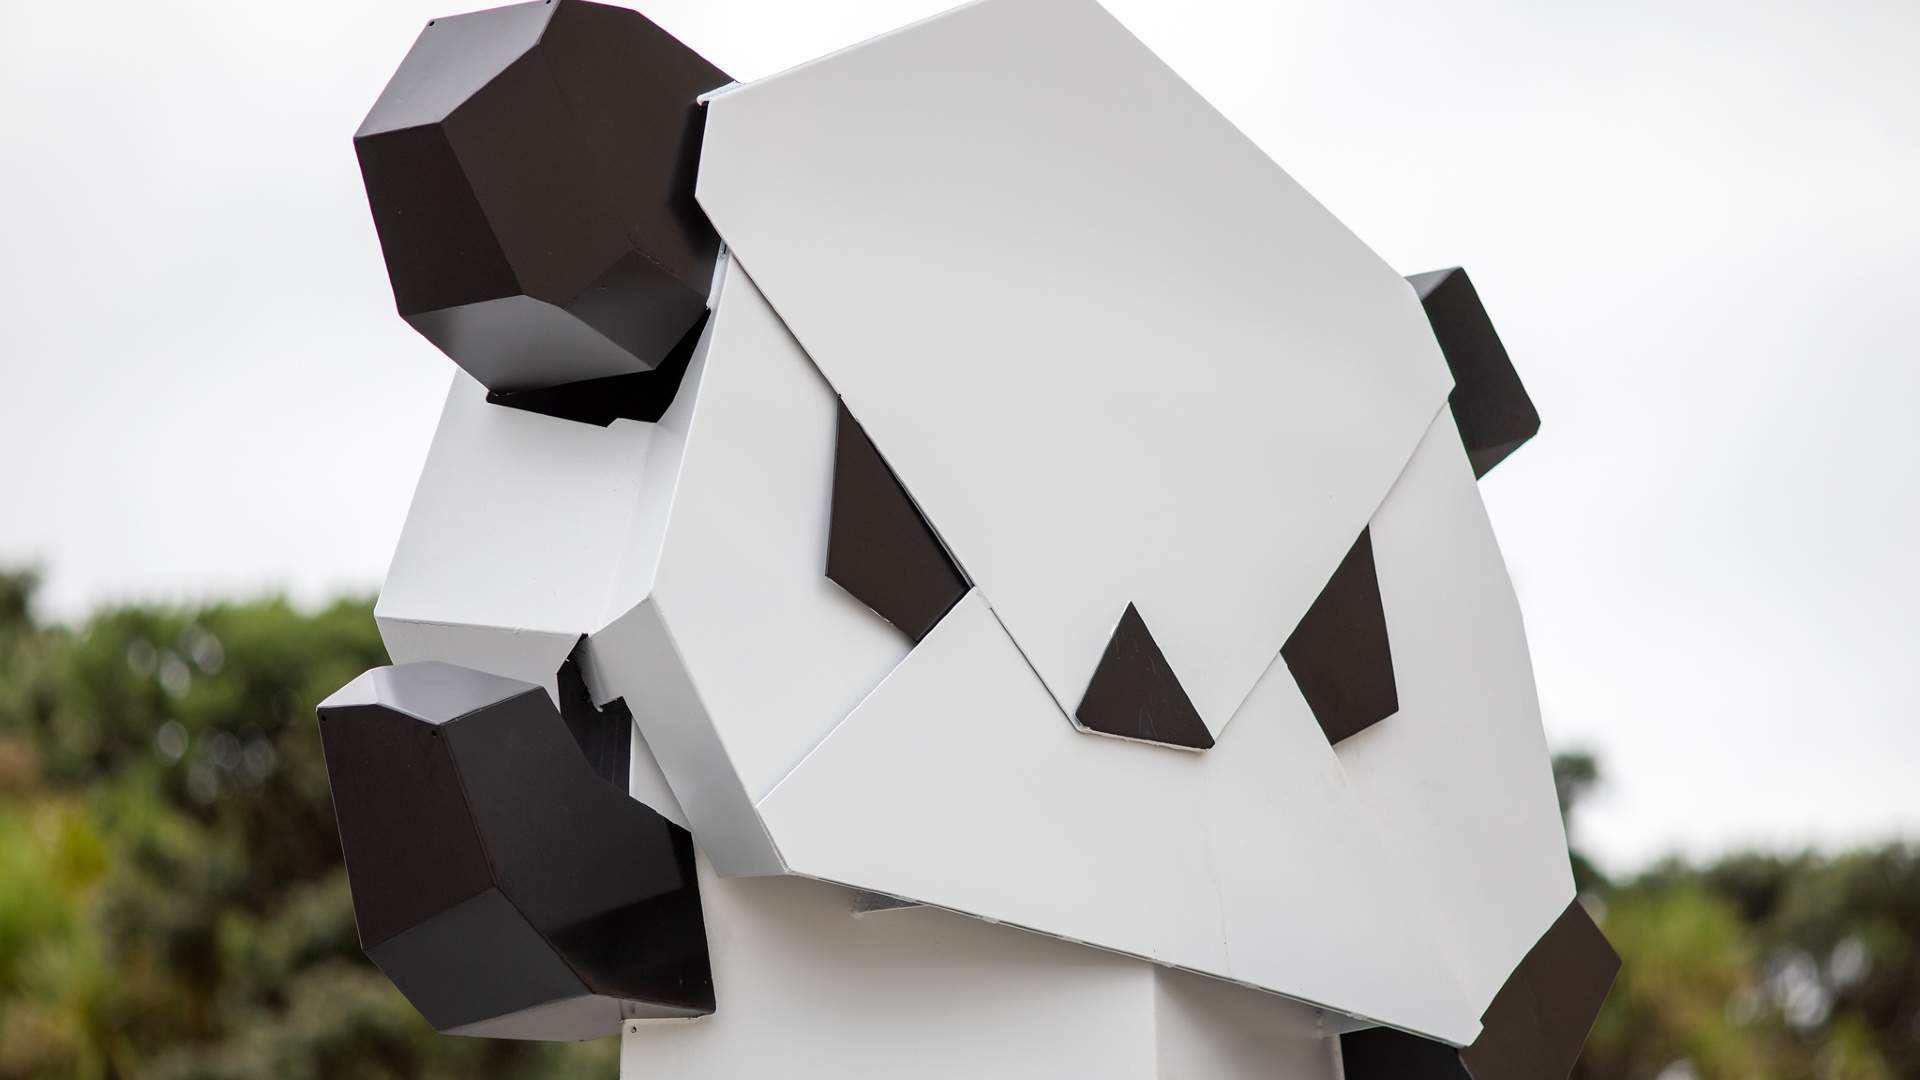 Four Adorable Larger-Than-Life Origami Animals Have Taken Up Residence Outside Te Papa